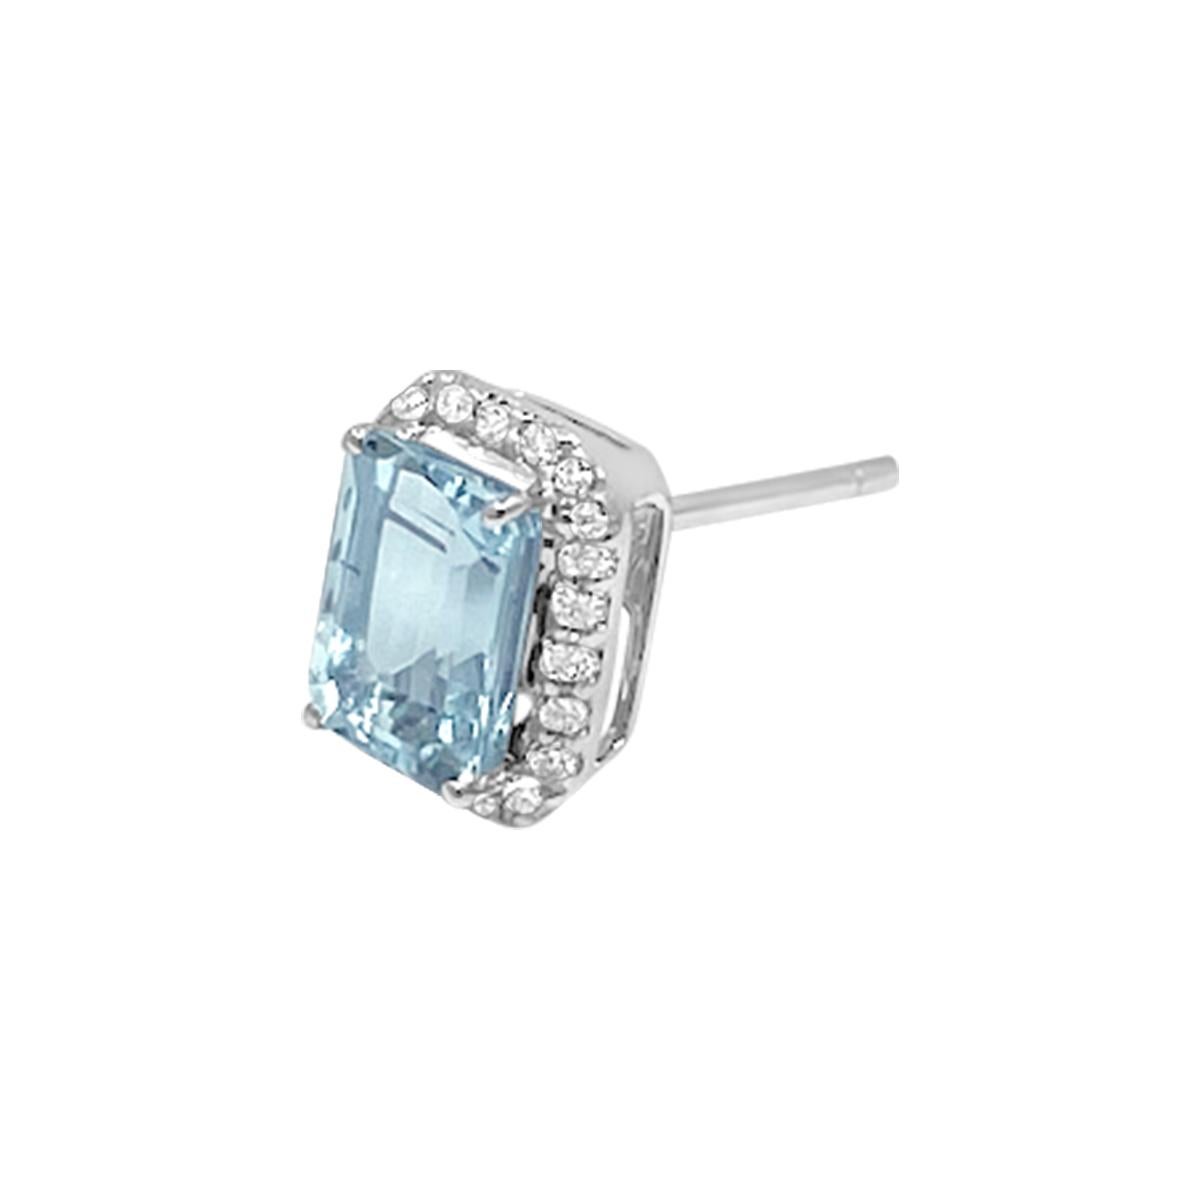 Dreamy, spiritual and flowing the aquamarine is symbolic of true love. As the traditional gift given for the 19th wedding anniversary, it re-awakens love and deepens love.

Style# TS1070AQE
Aquamarine: Octagon 7x5mm 1.88cts
Diamond: 40pcs 0.24cts
